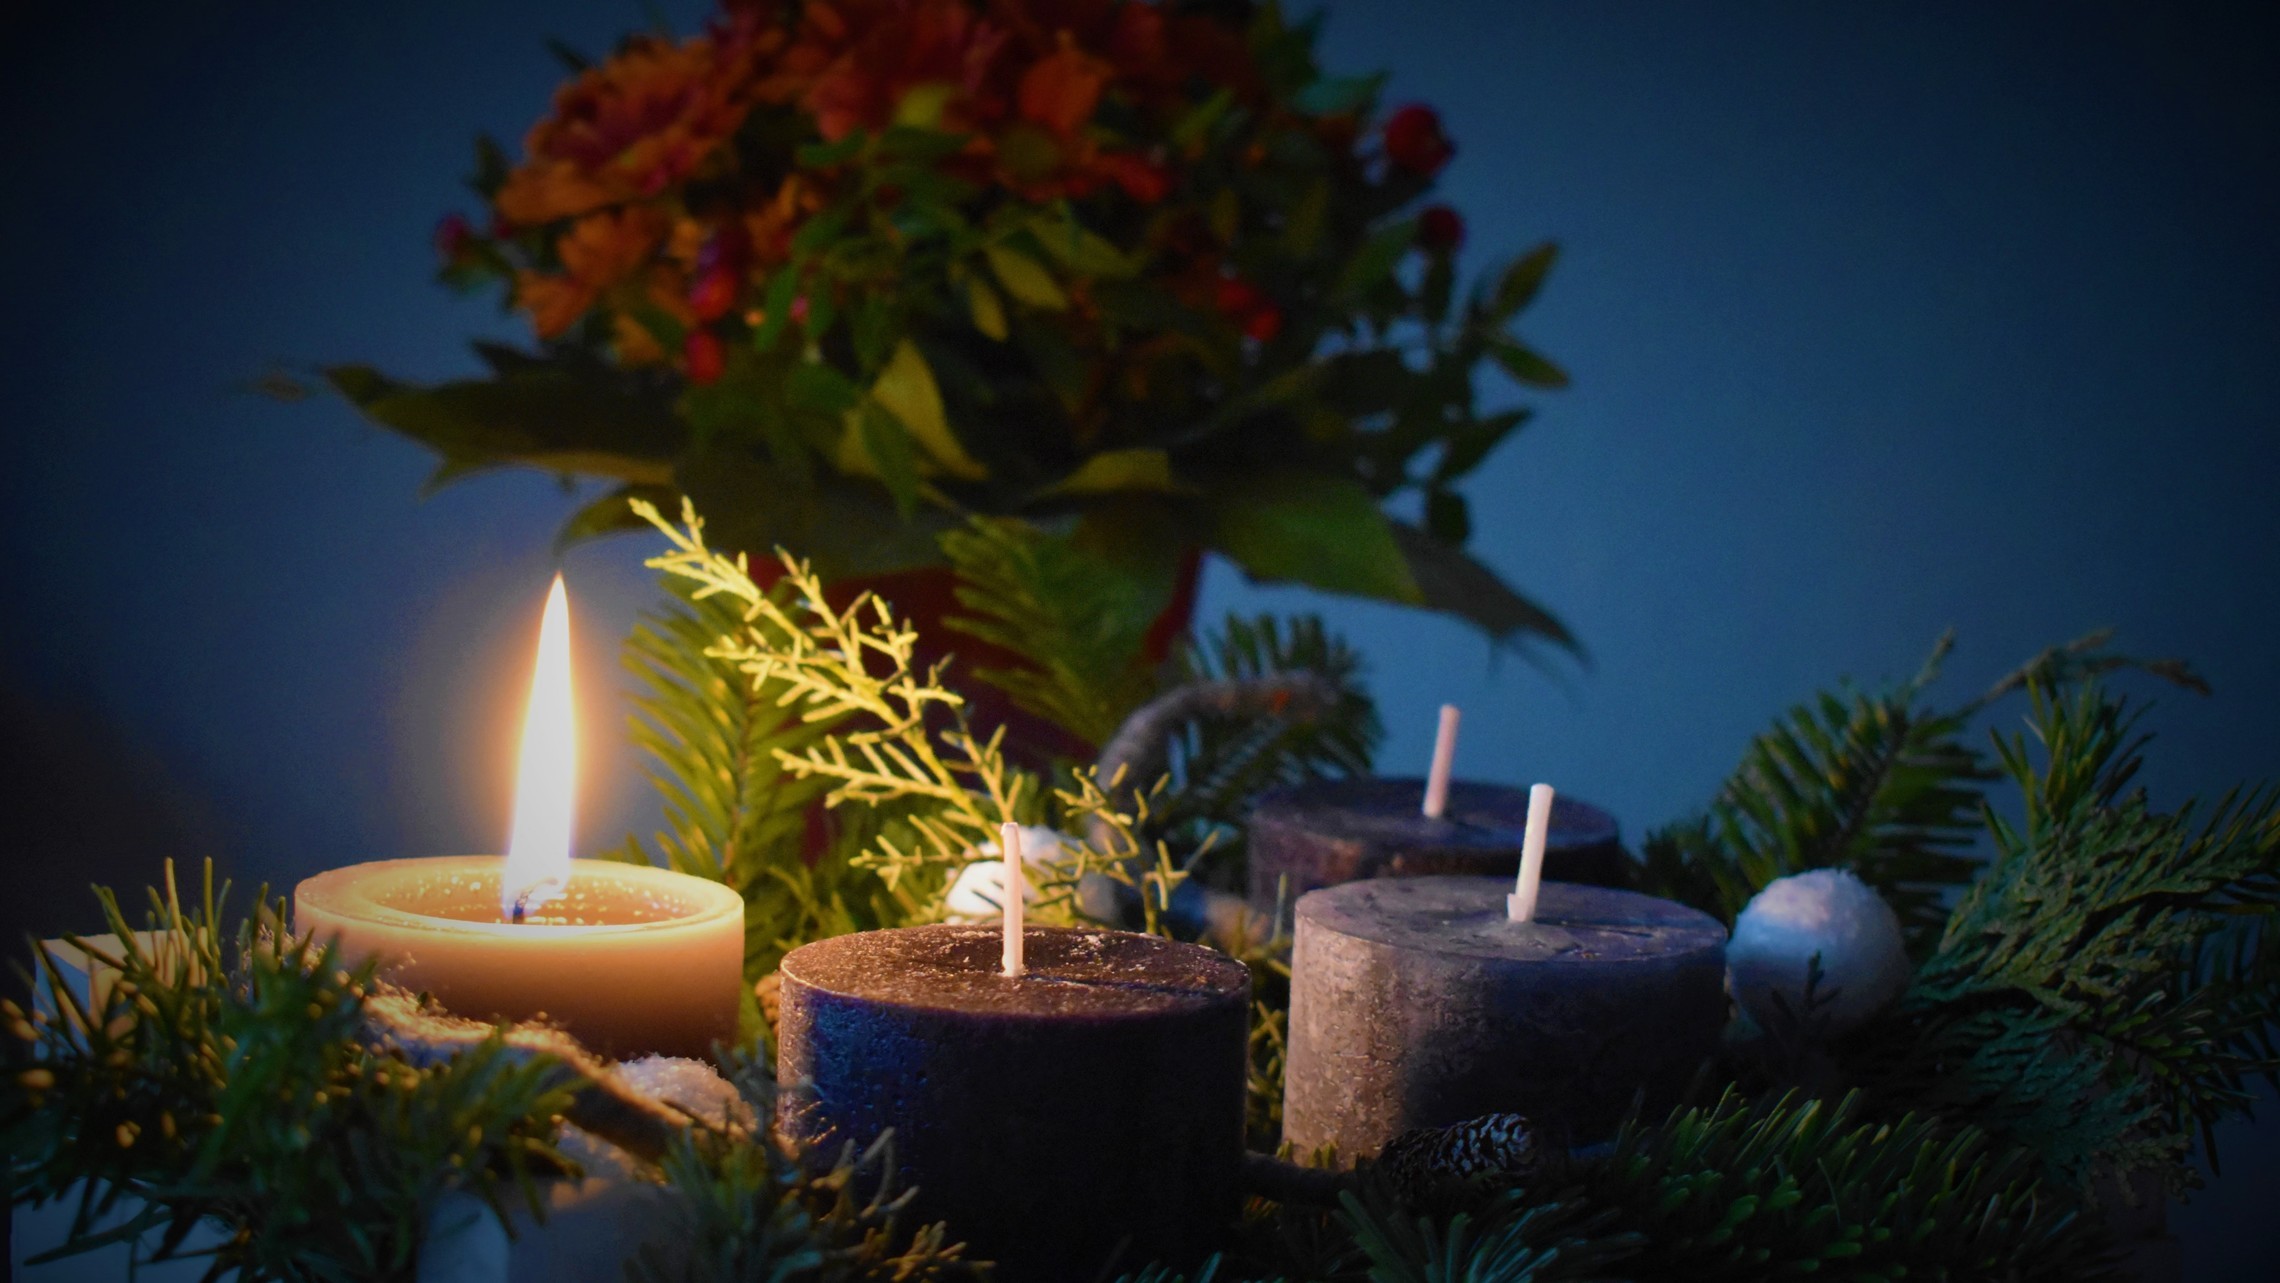 one lit candle, three unlit candles among some ferns